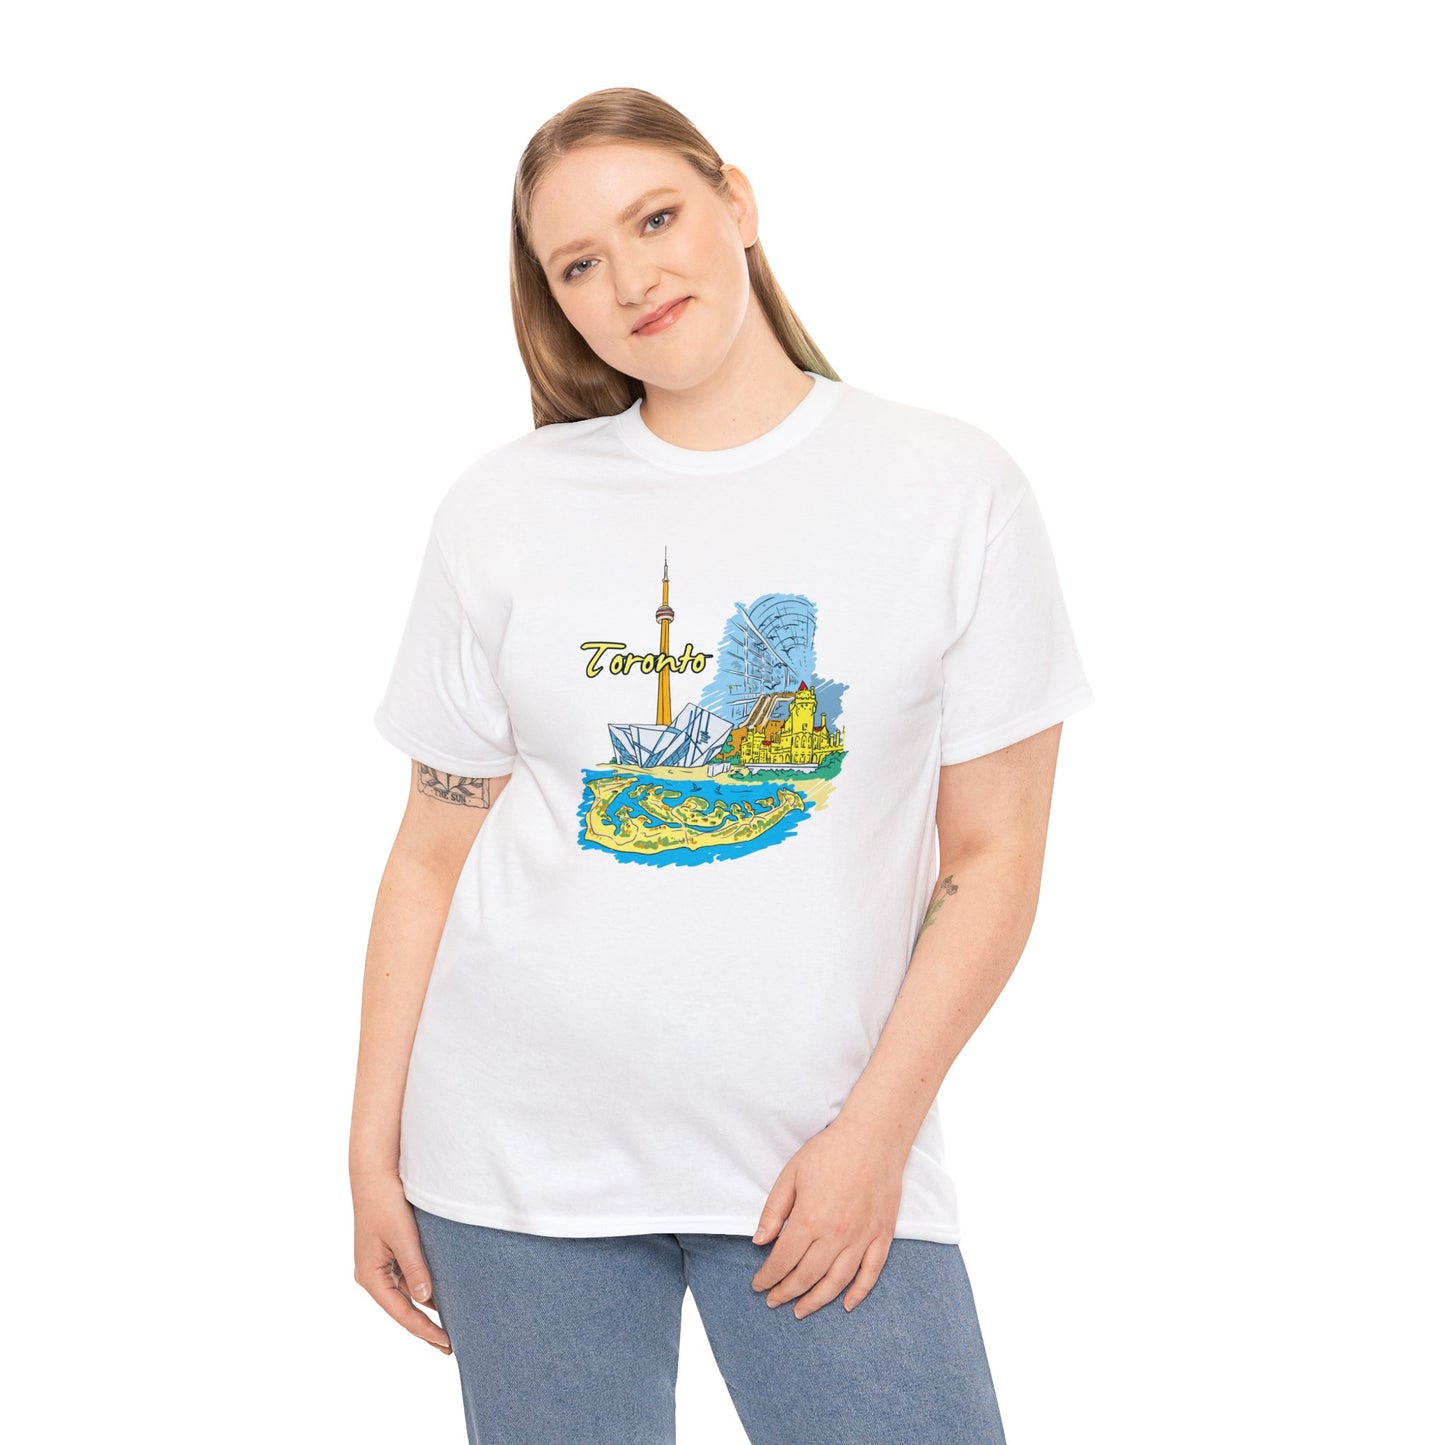 Comfortable Toronto-Inspired T-Shirt - A Must-Have for City Enthusiasts!